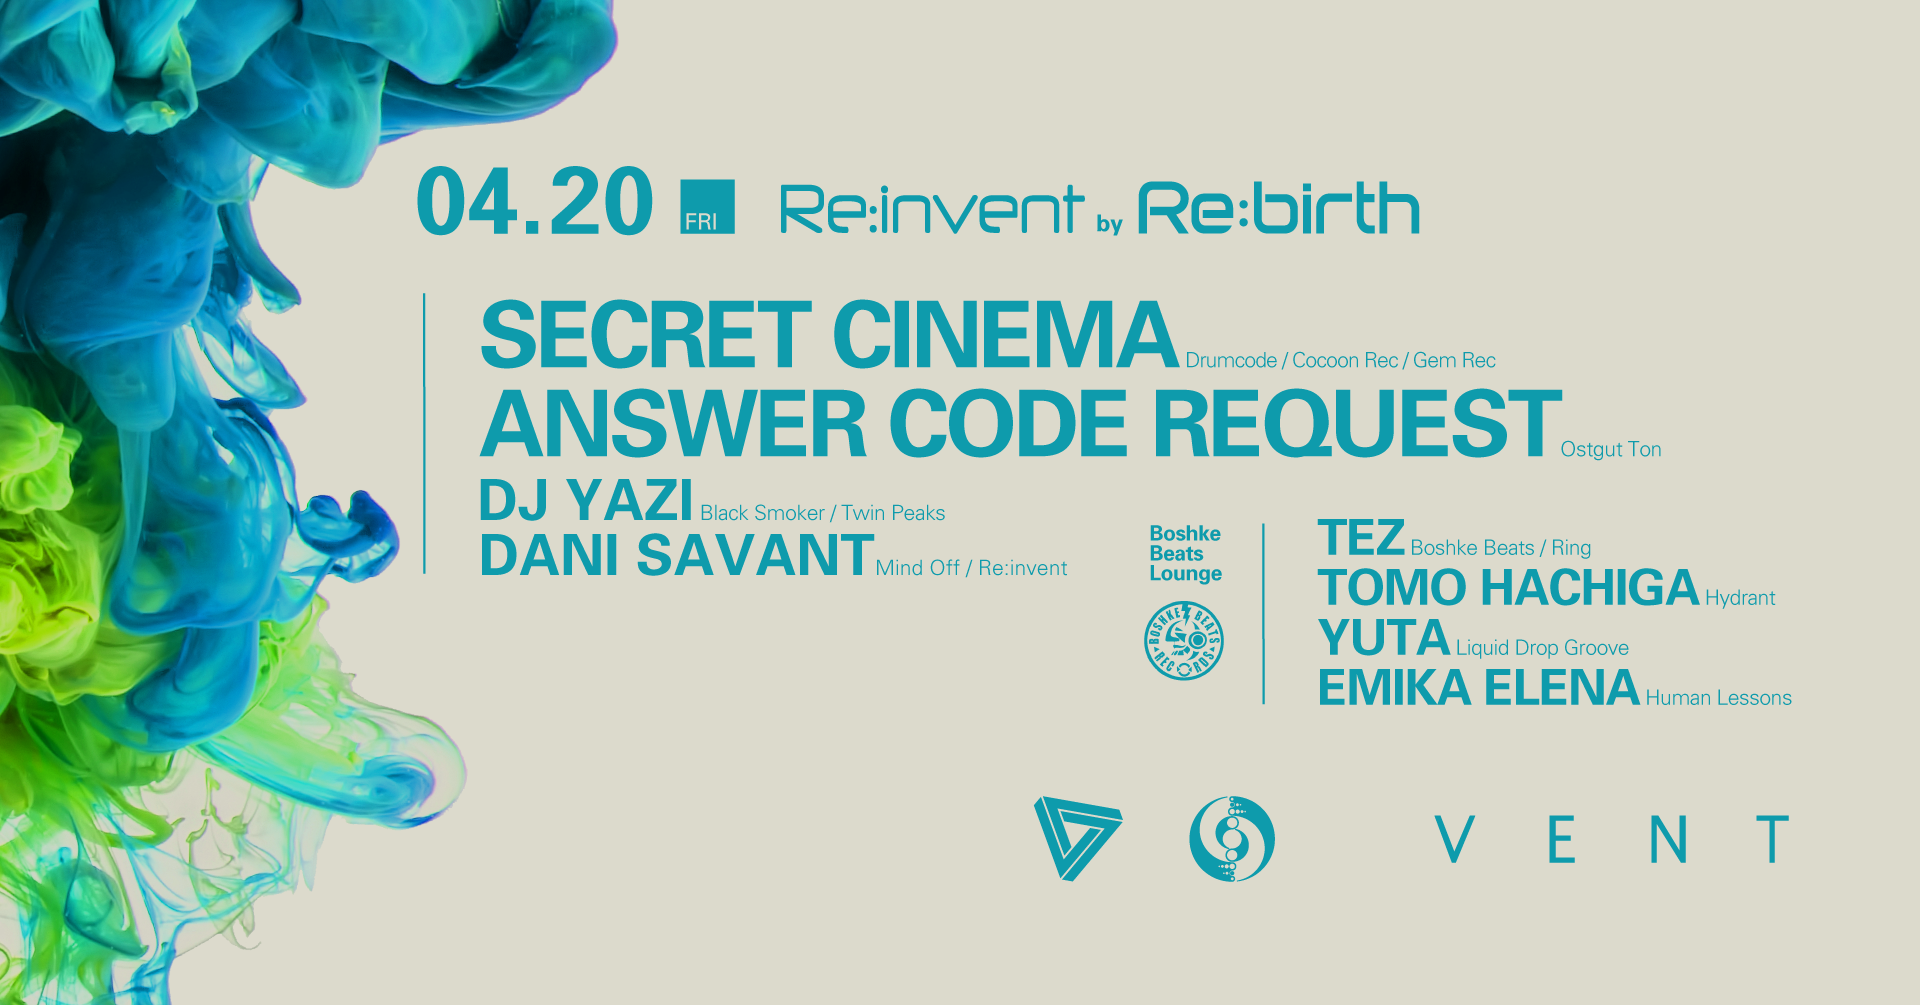 Secret Cinema & Answer Code Request at Re:invent by Re:birth